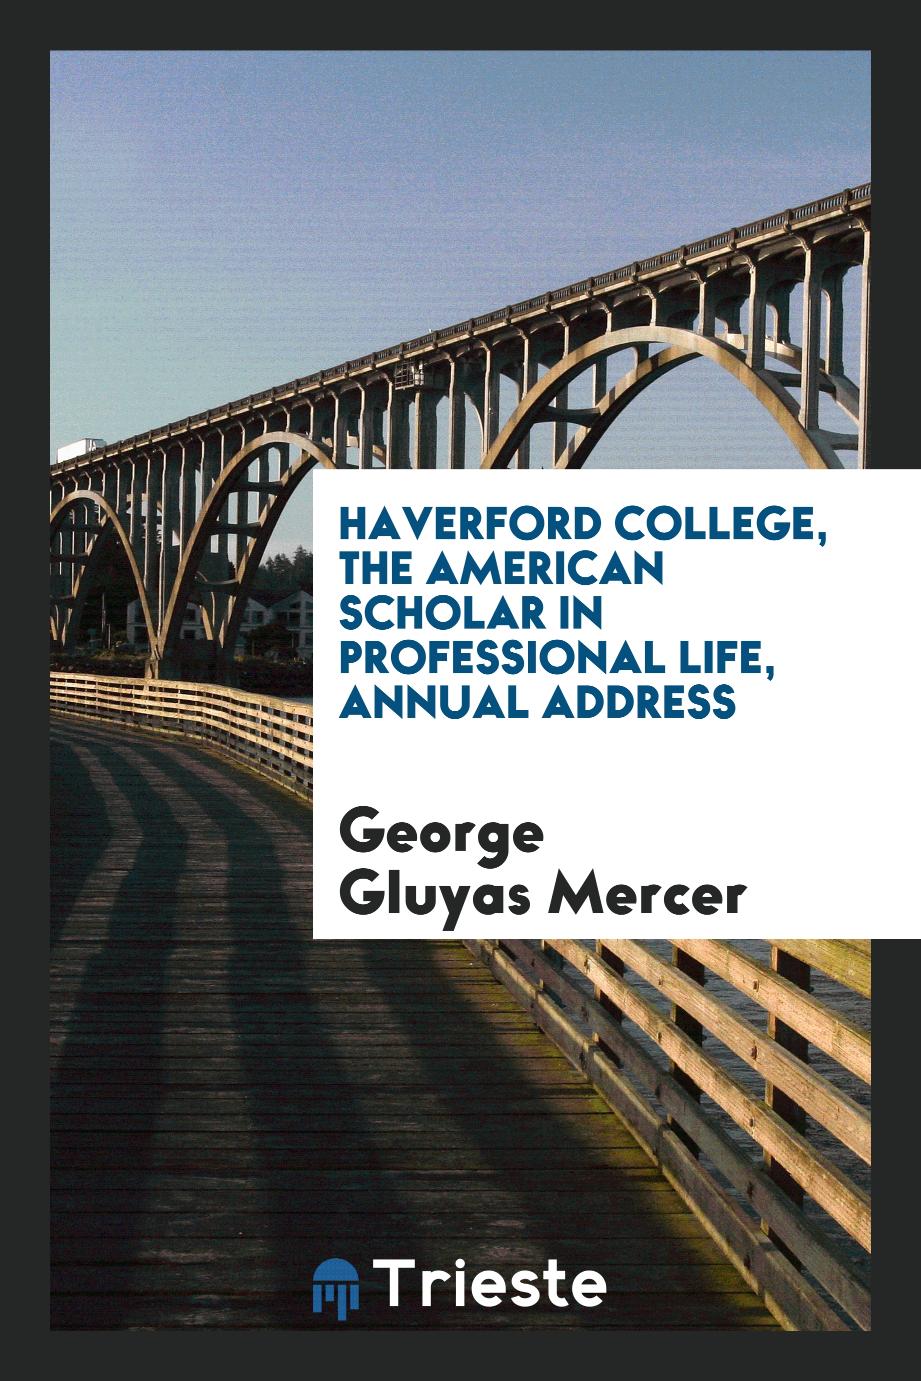 Haverford College, The American Scholar in Professional Life, Annual Address